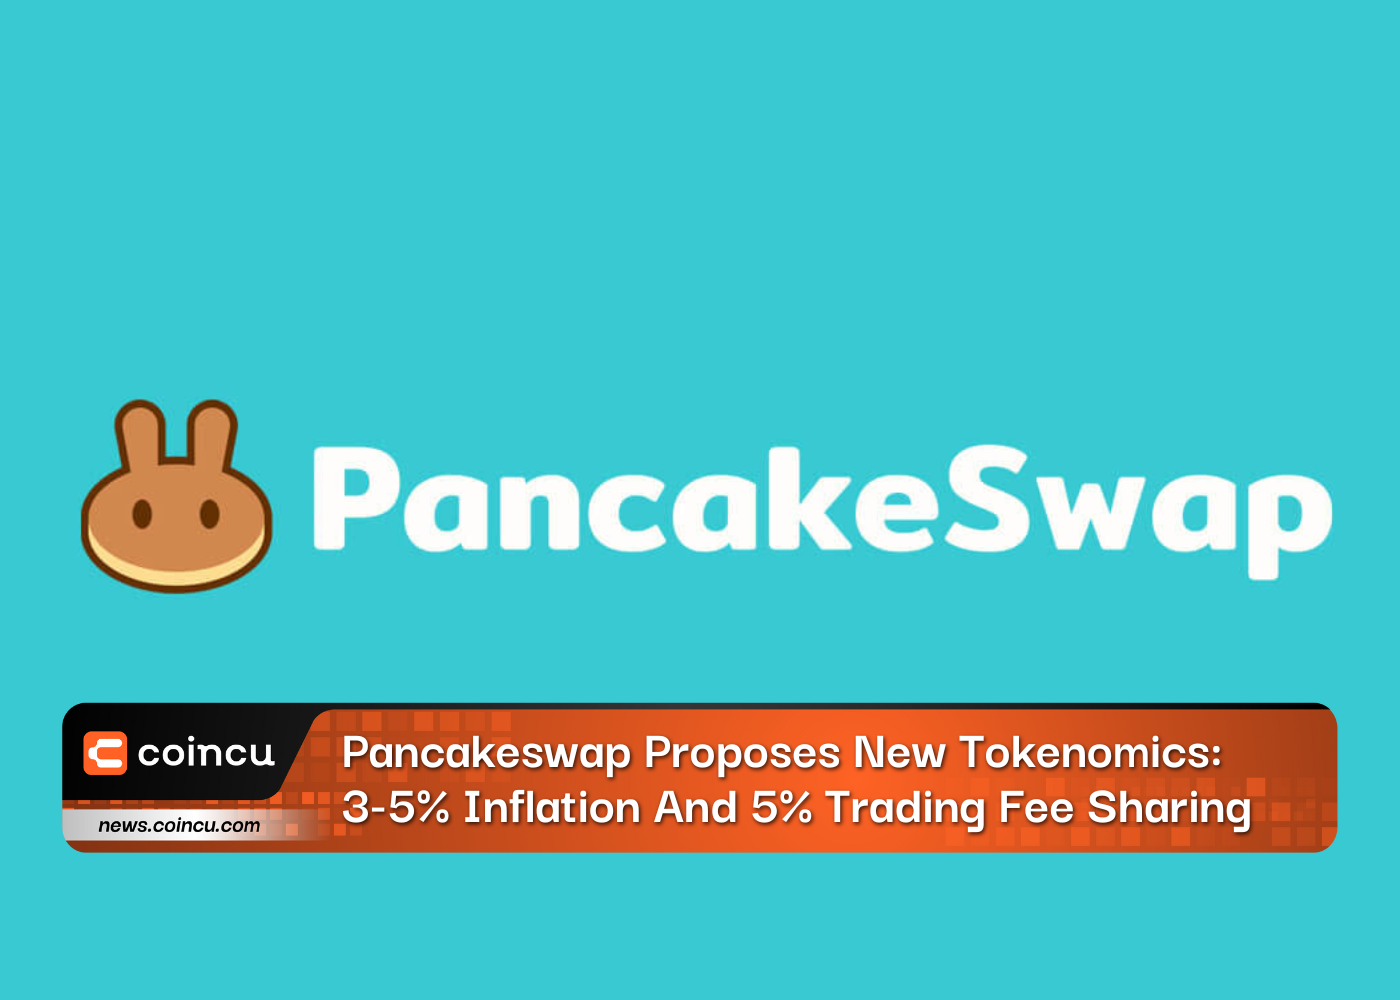 Pancakeswap Proposes New Tokenomics: 3-5% Inflation And 5% Trading Fee Sharing